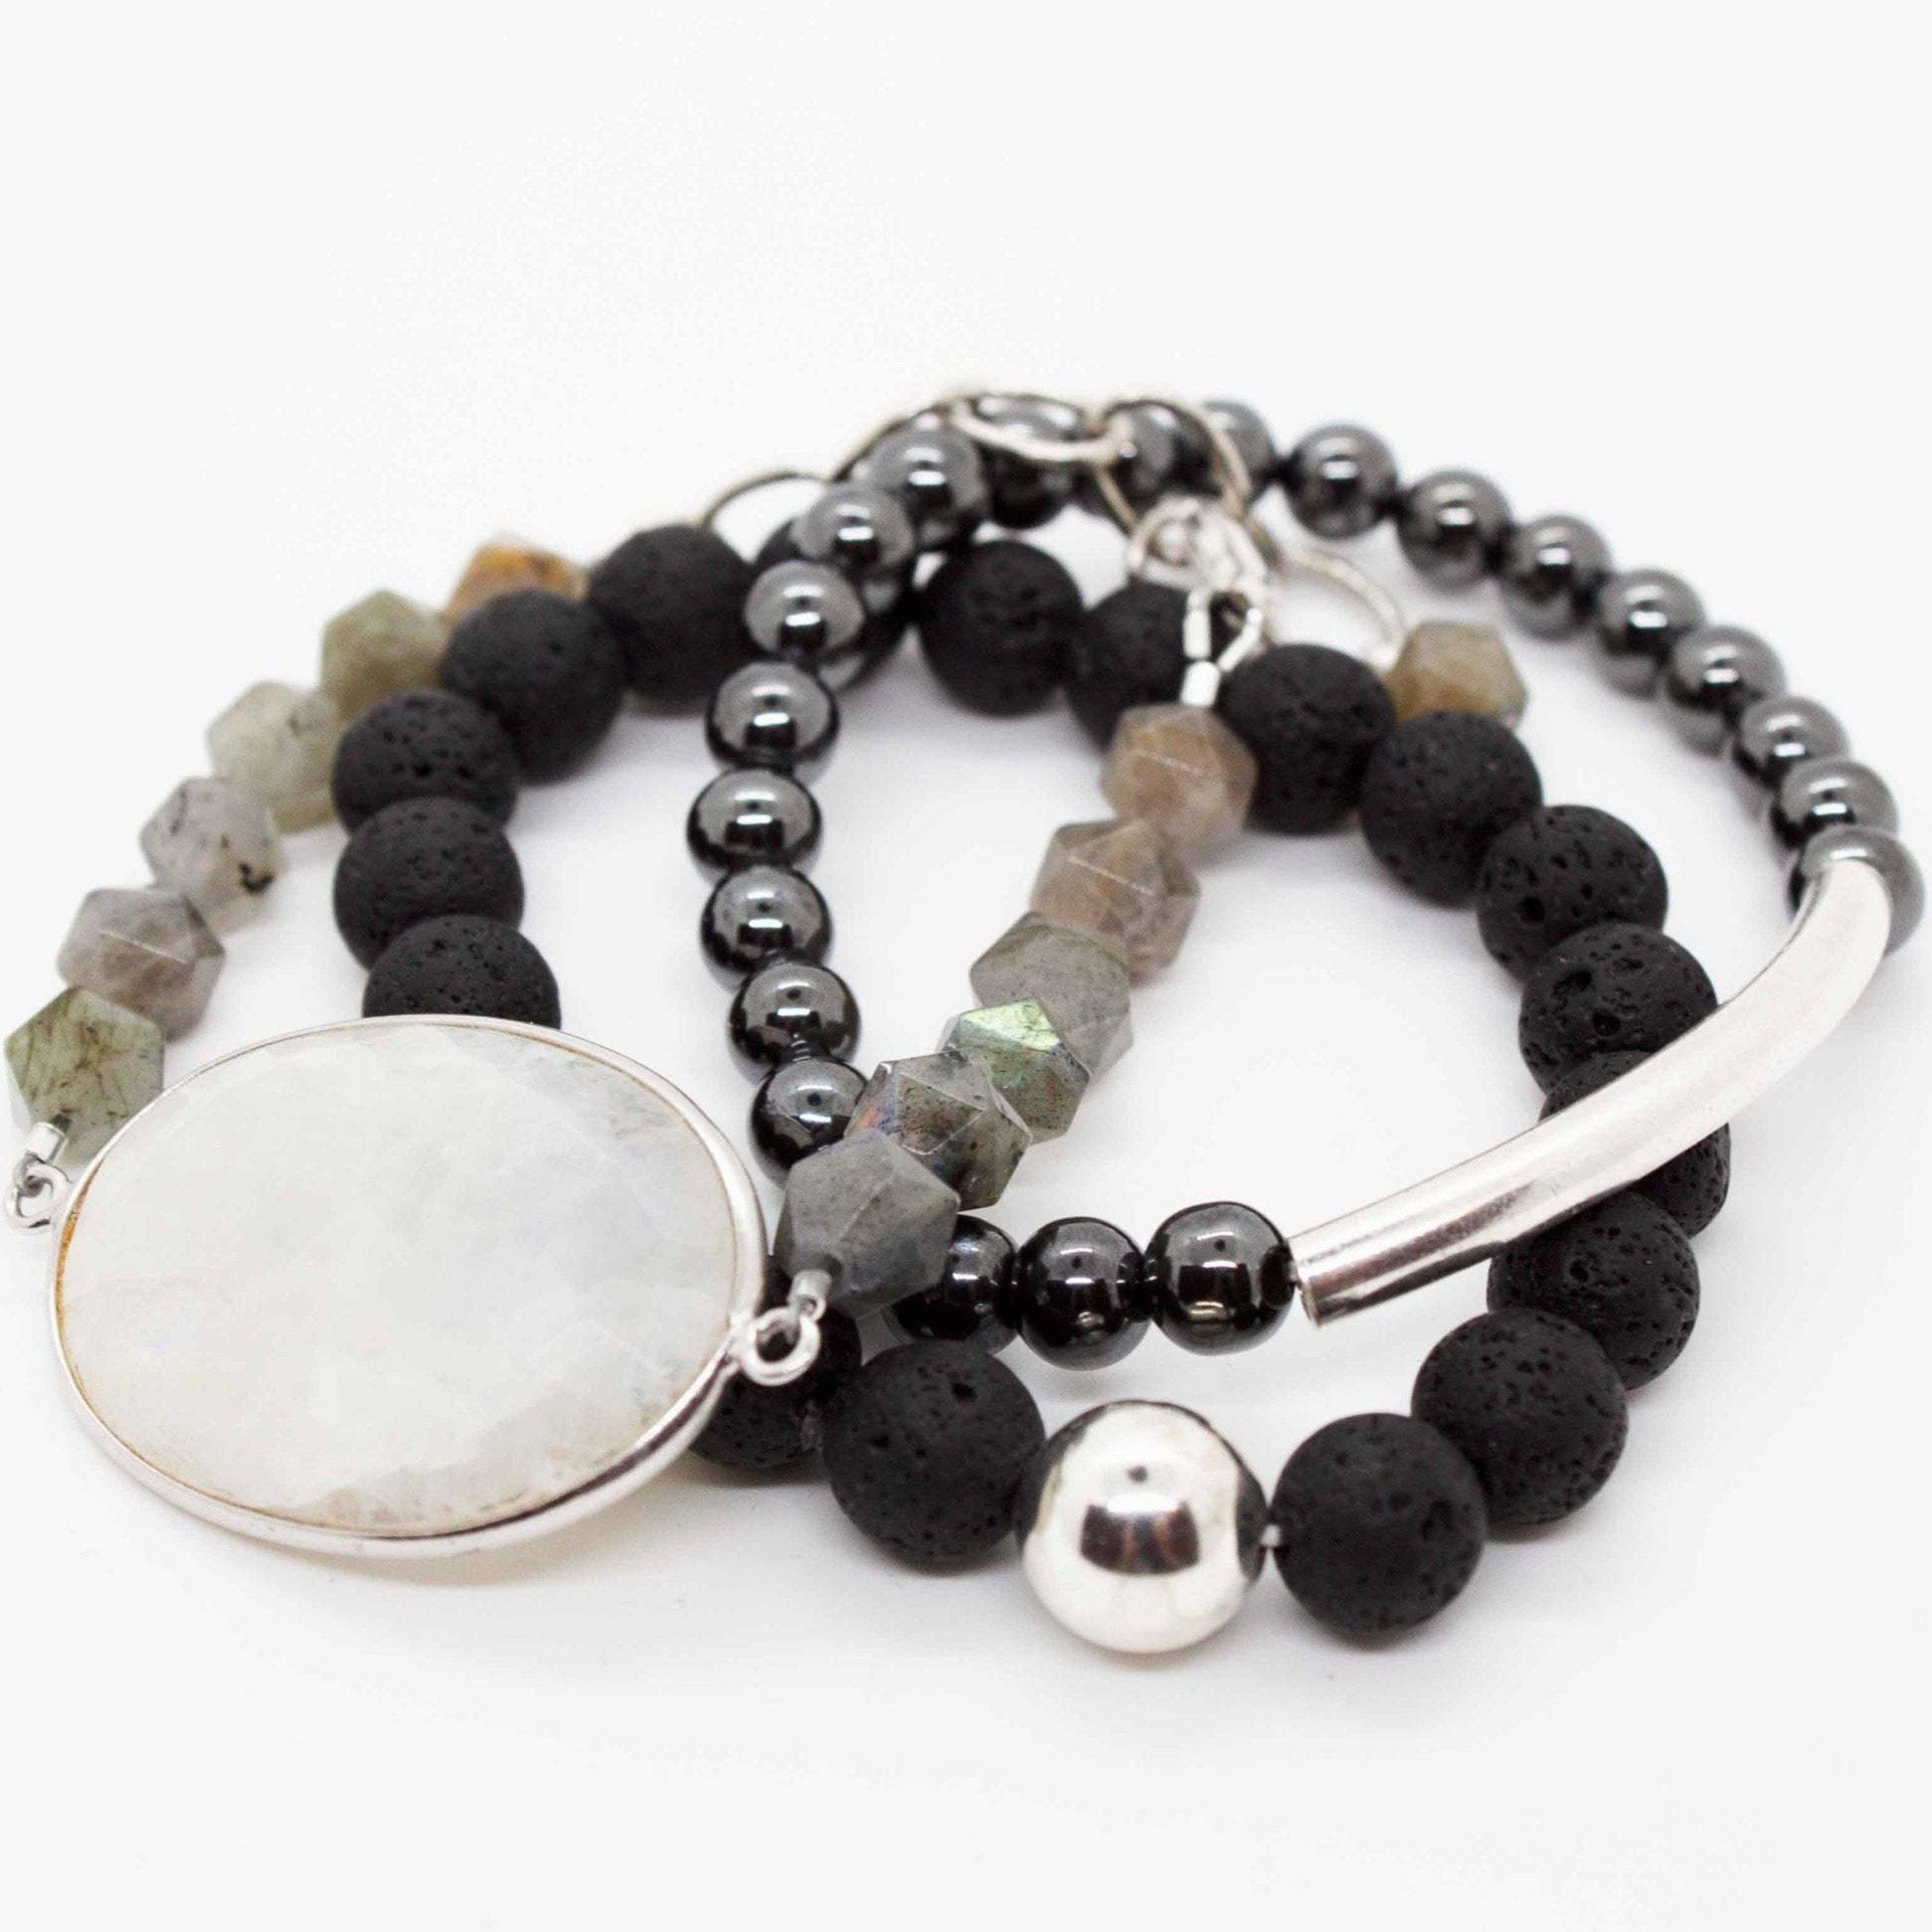 Cadence bracelet stack: 3 beaded bracelets made from labradorite, lava, hematite and sterling silver beads. Labradorite bracelet has large rainbow moonstone pendant and adjustable sterling silver lobster clasp.